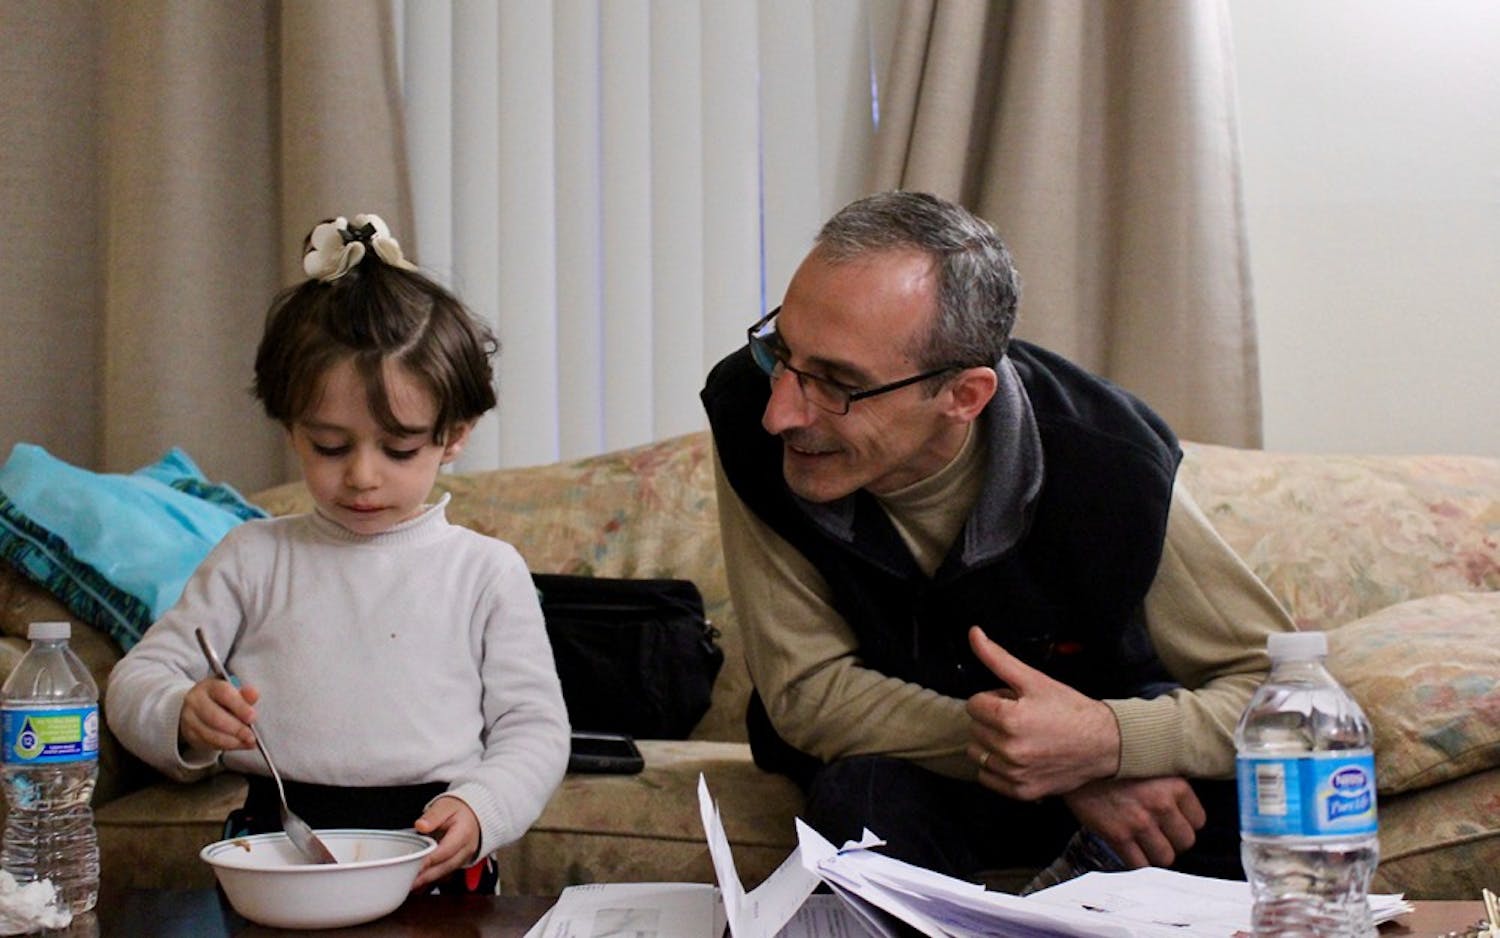 Mohamed Lababidi teases daughter Remas about her afternoon ice cream snack. A house painter in Syria, Mohamed is now struggling to find&nbsp;a job that doesn't require a lot of English.&nbsp;